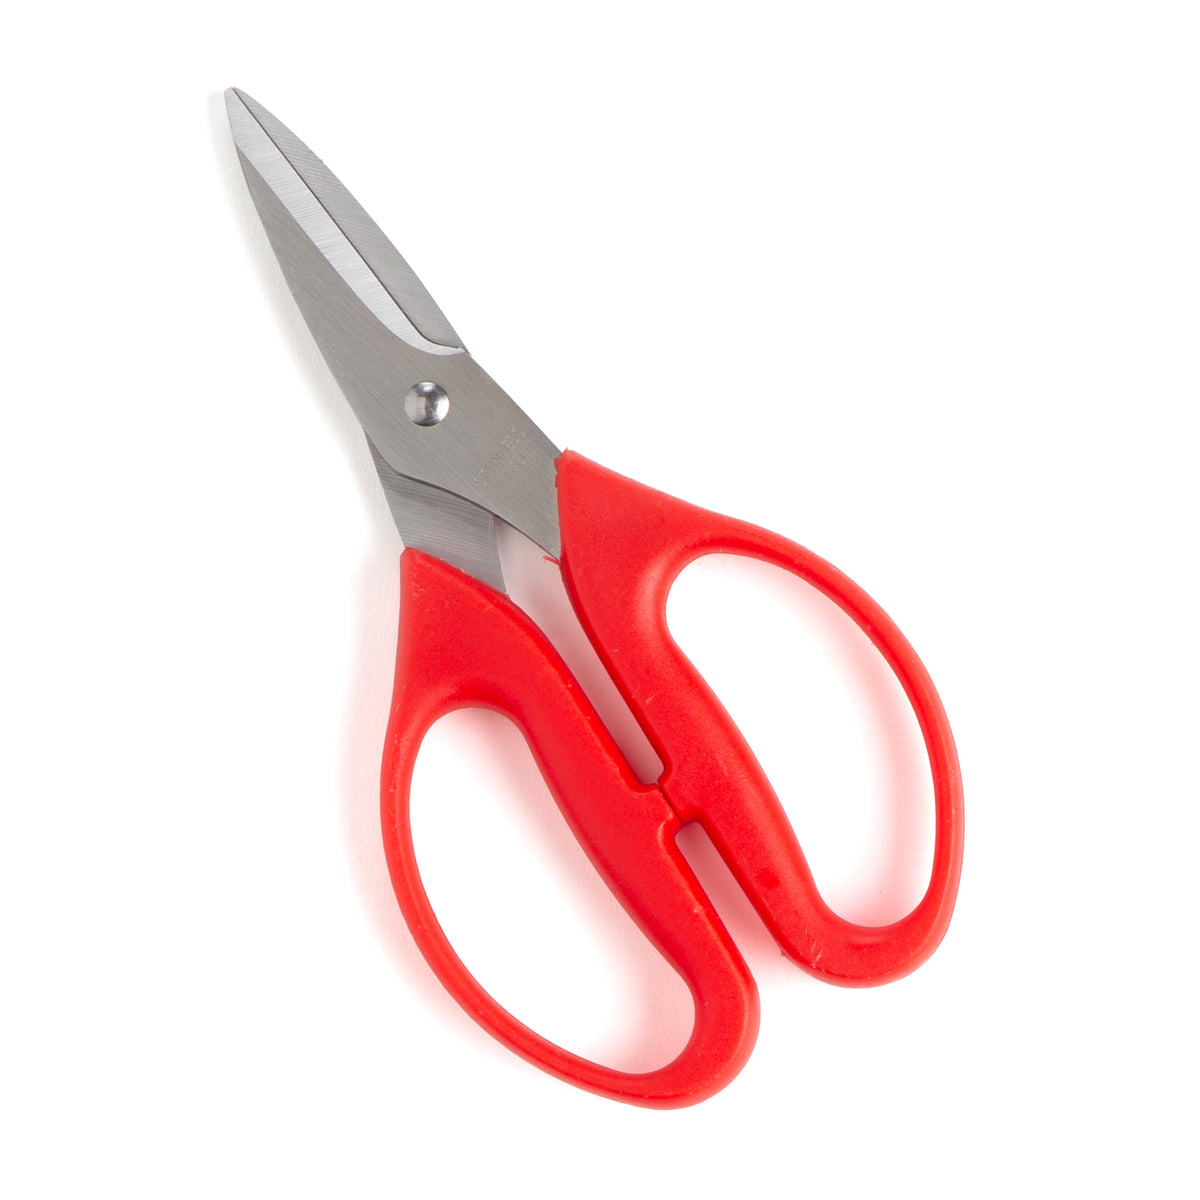 Leather Scissors. Small Sharp Stainless Steel Durable Blades - Effortless Cutting - Large Comfortable Shears for Crafting Sewing Clay Bead Kit